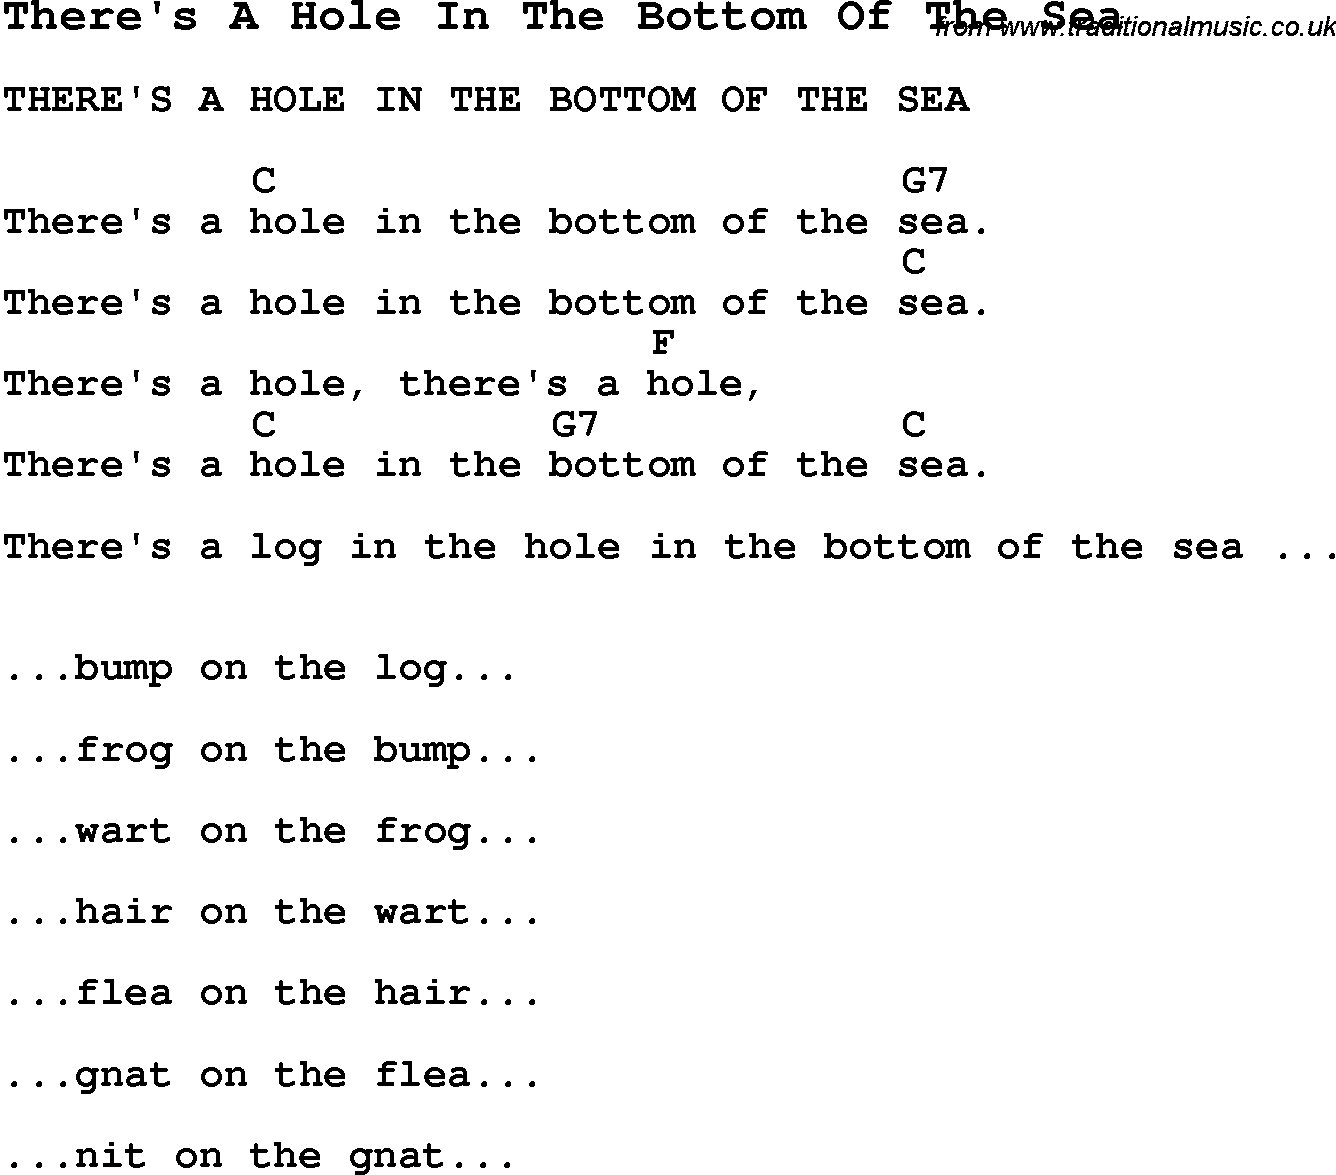 Summer-Camp Song, There's A Hole In The Bottom Of The Sea, with lyrics and chords for Ukulele, Guitar Banjo etc.